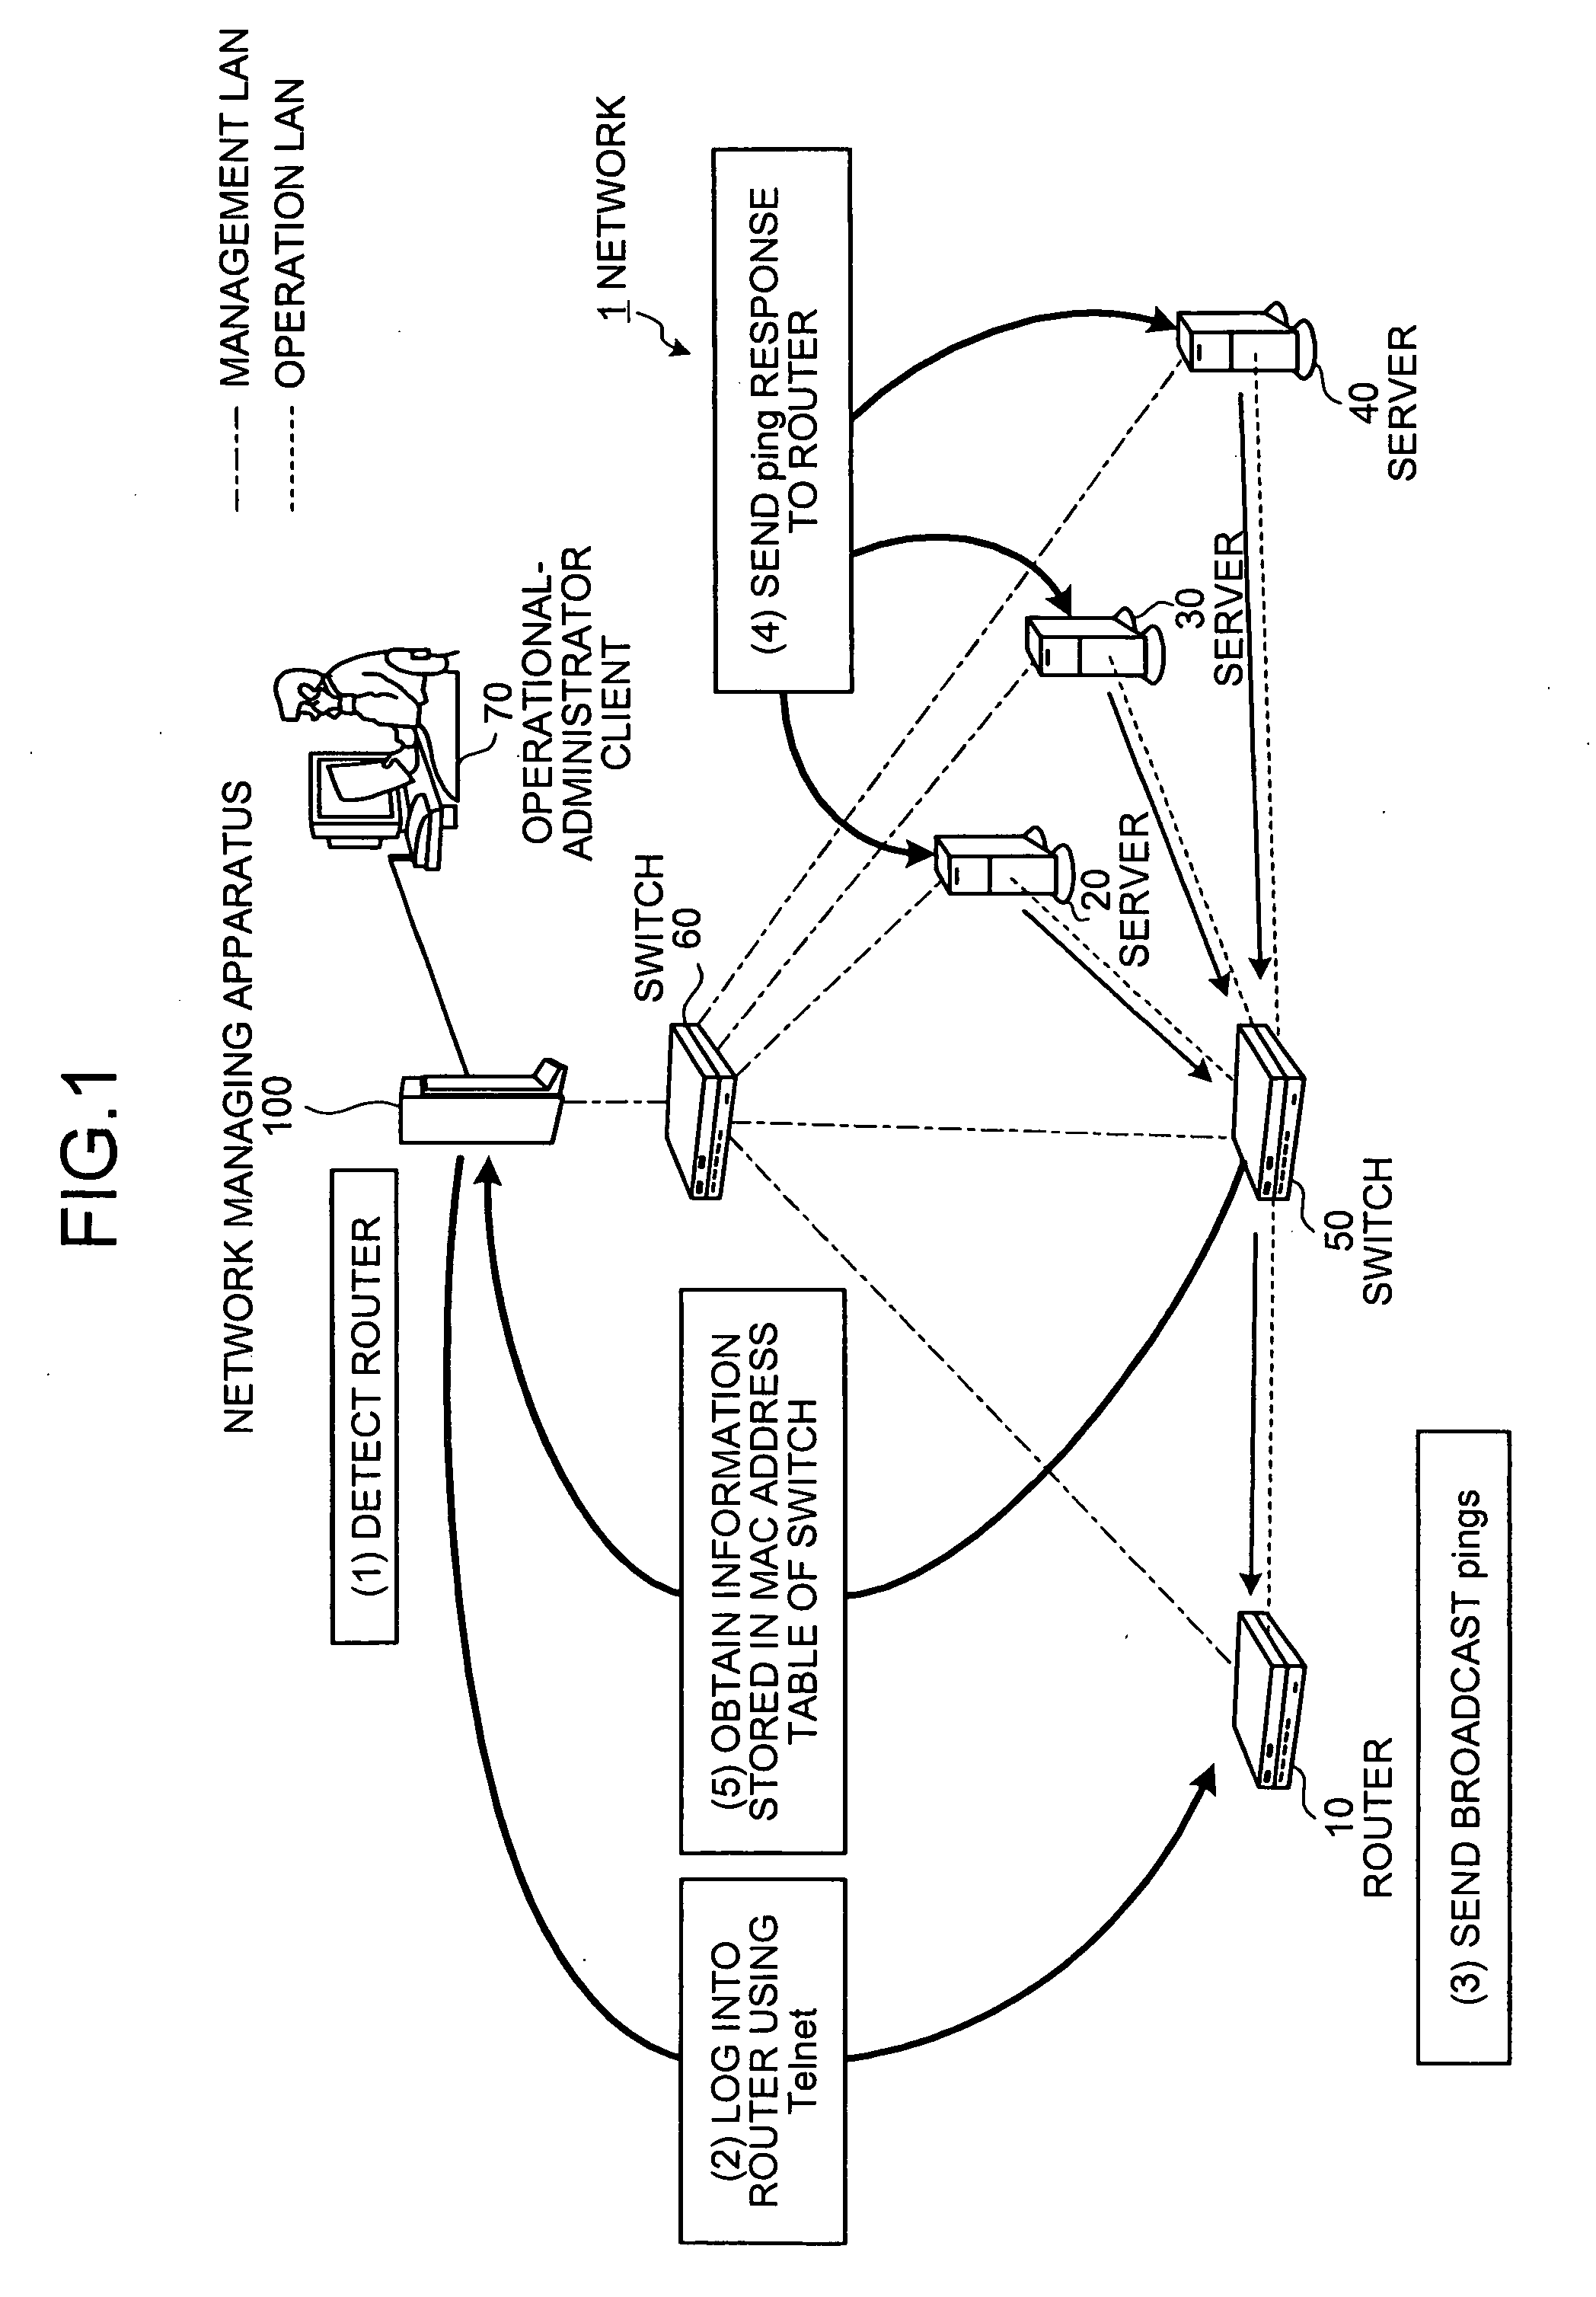 Apparatus, method, and computer product for topology-information collection